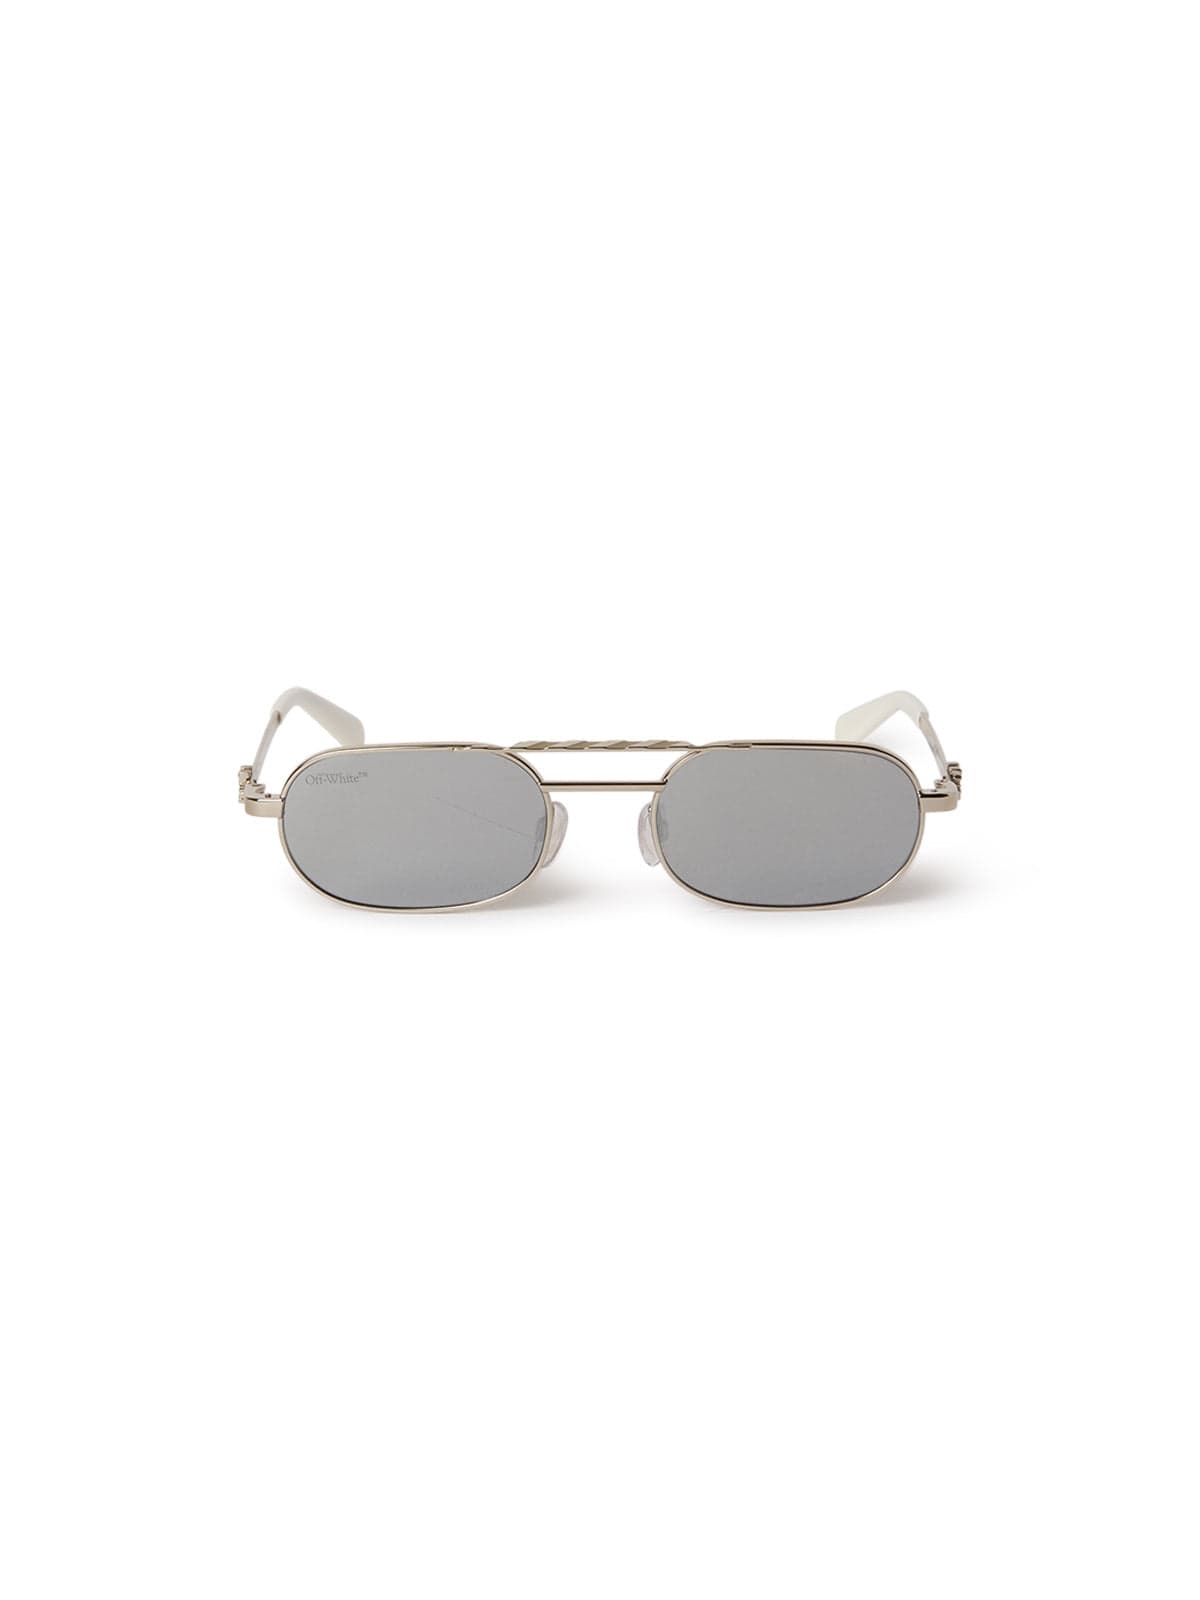 Off-White Baltimore: Silver sunglasses with mirror lenses